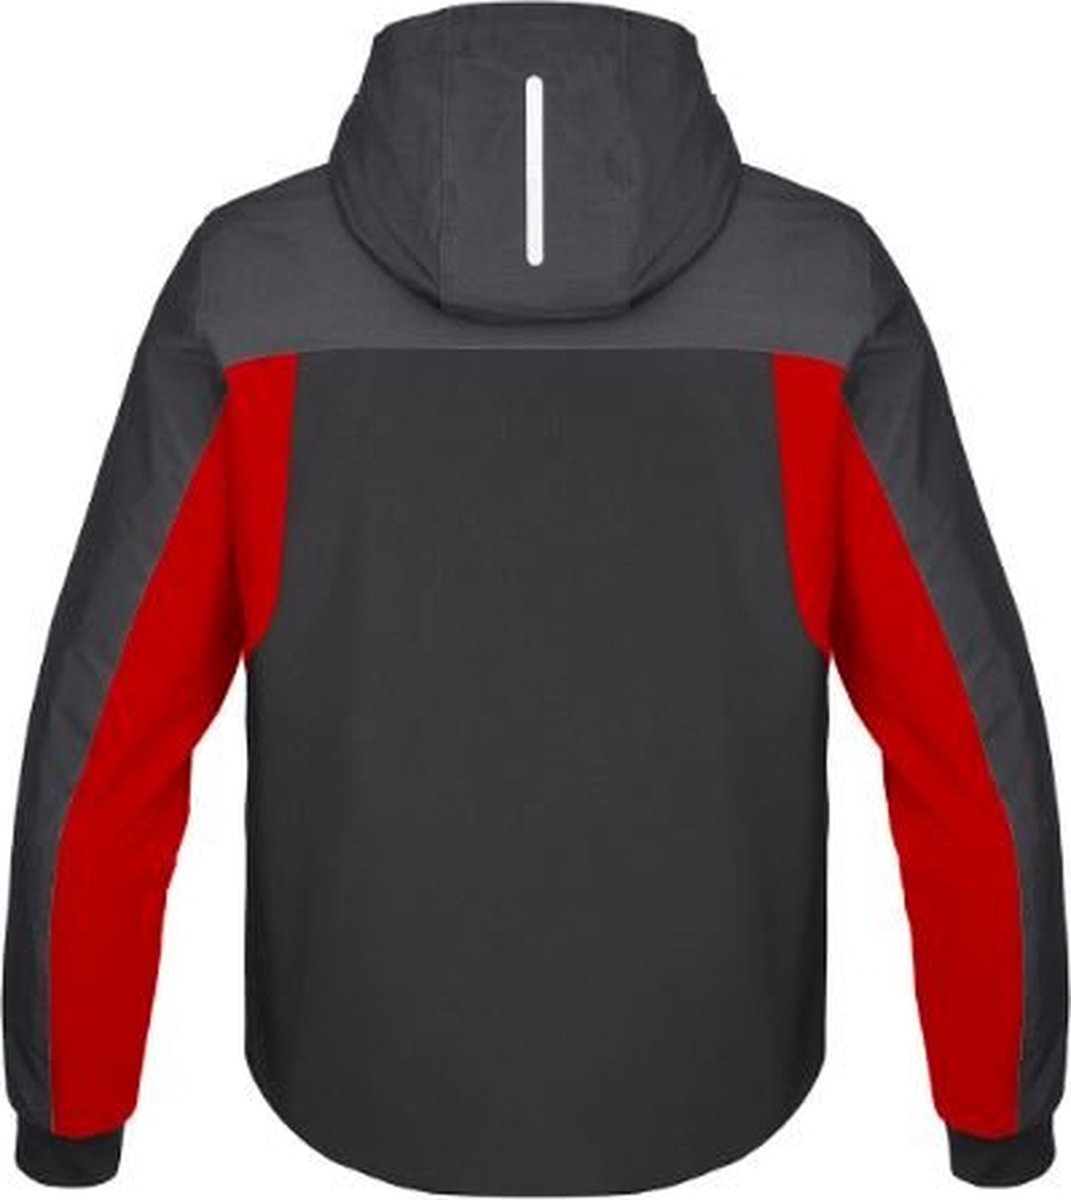 Spidi Hoodie H2Out II Black Anthracite Fluo Red L - Maat - Jas